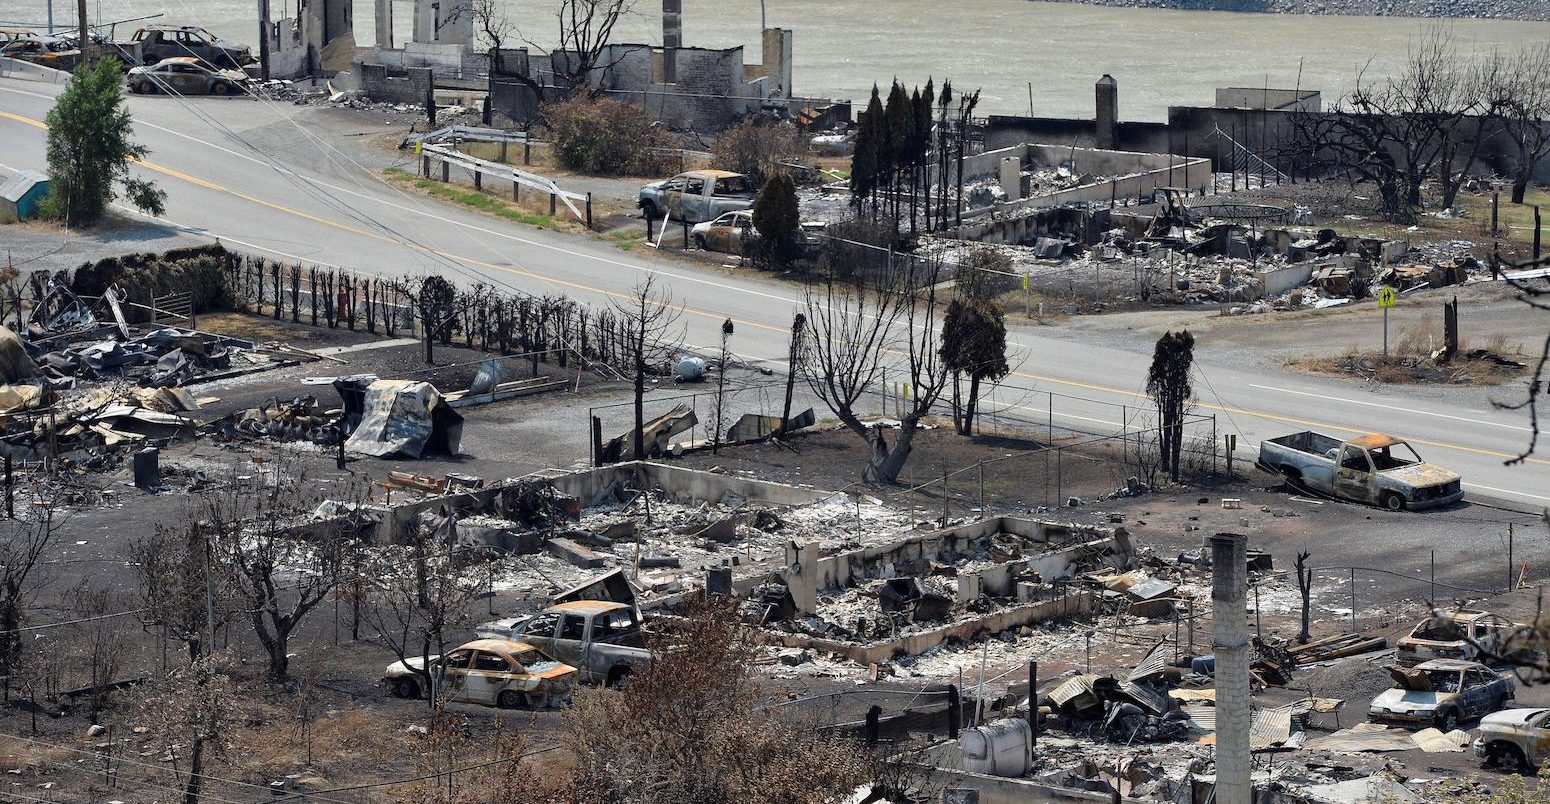 The charred remnants of buildings destroyed by a wildfire in Lytton, Canada.